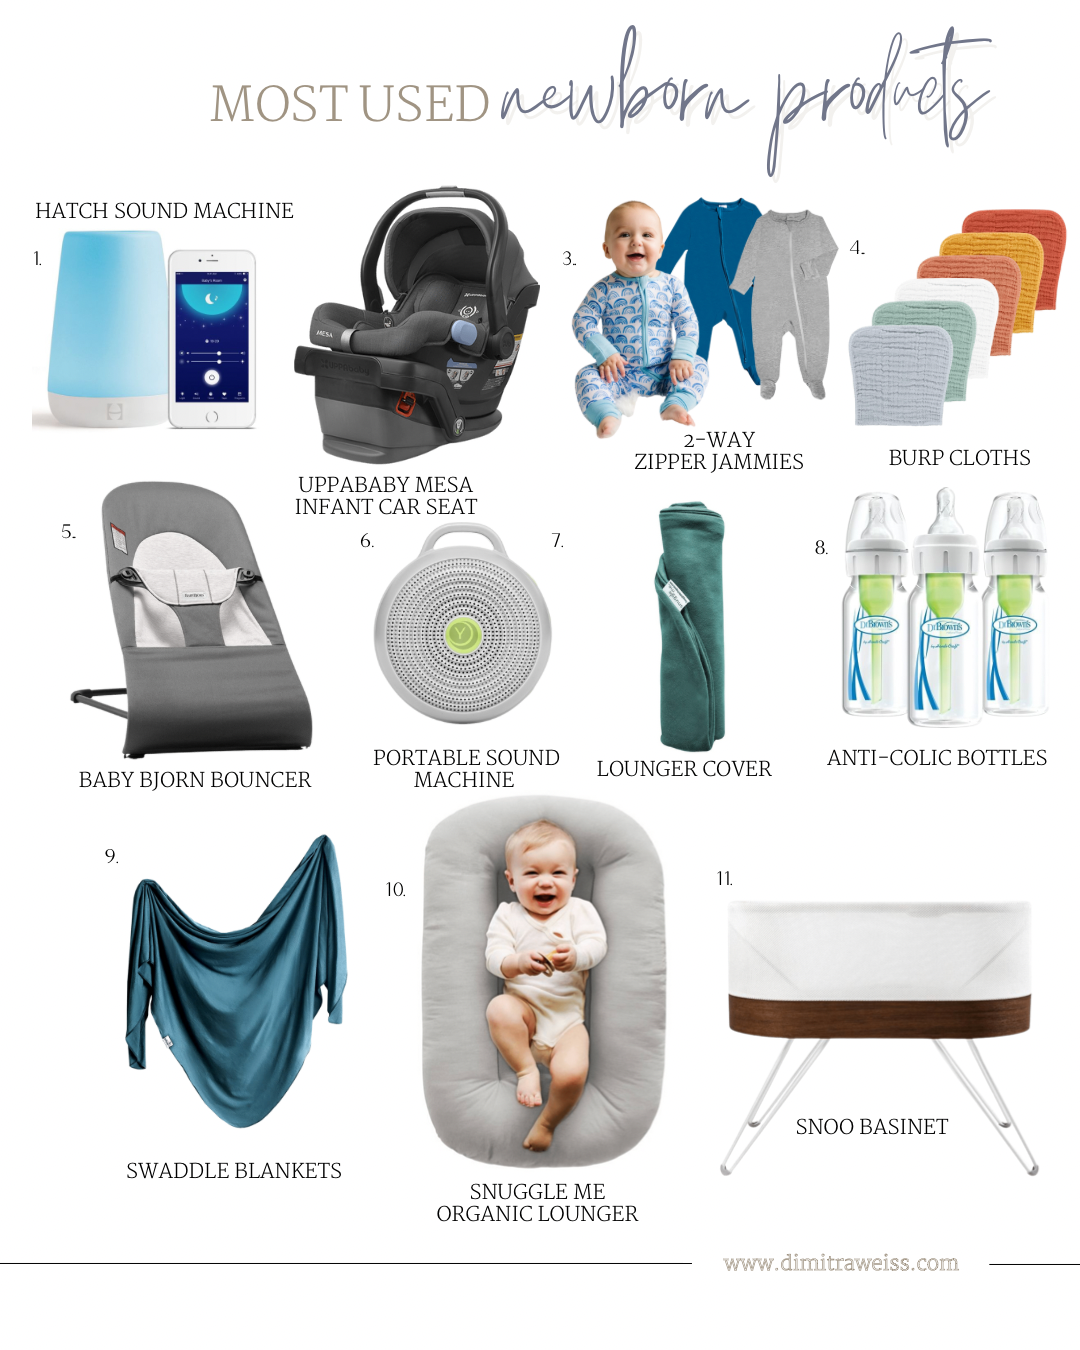 https://dimitraweiss.com/wp-content/uploads/2022/04/best-newborn-products-new-mom.png